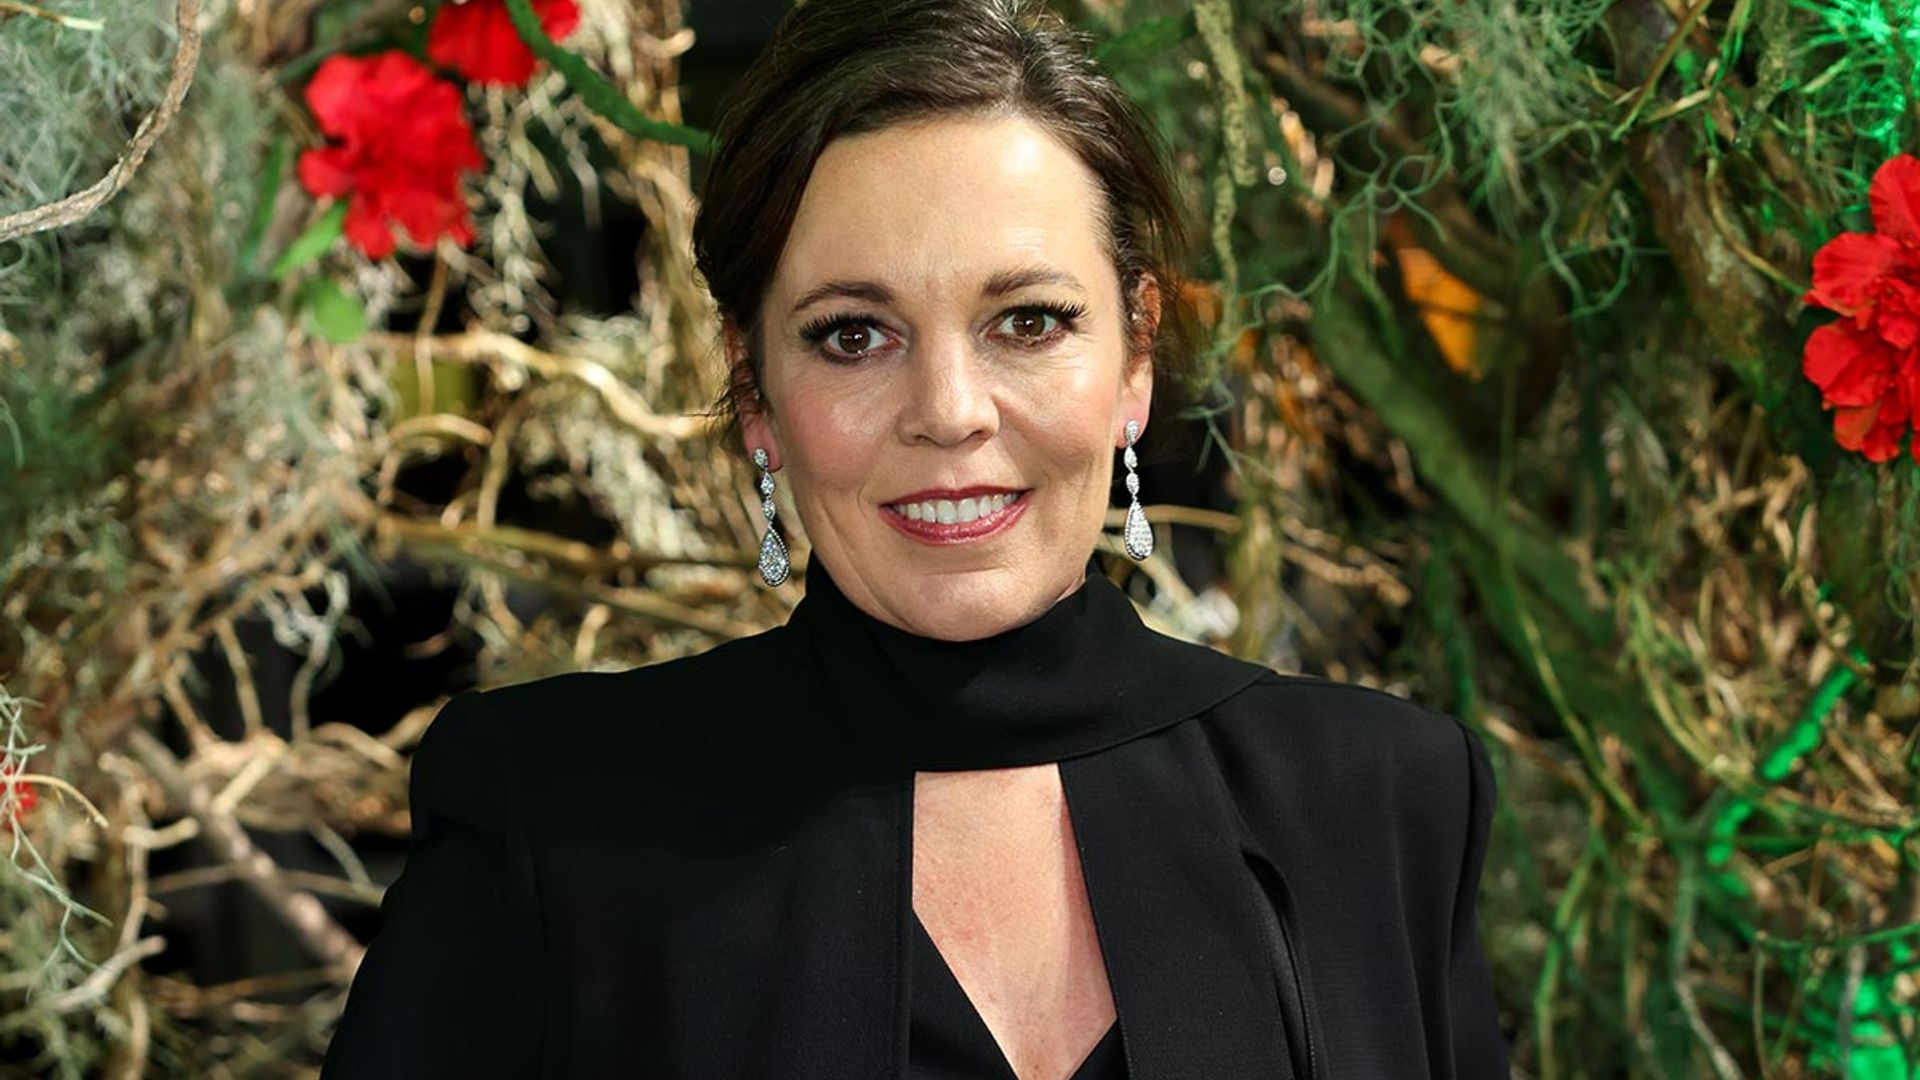 The Crown's Olivia Colman buys regal £1.3m home close to the Queen's Sandringham estate